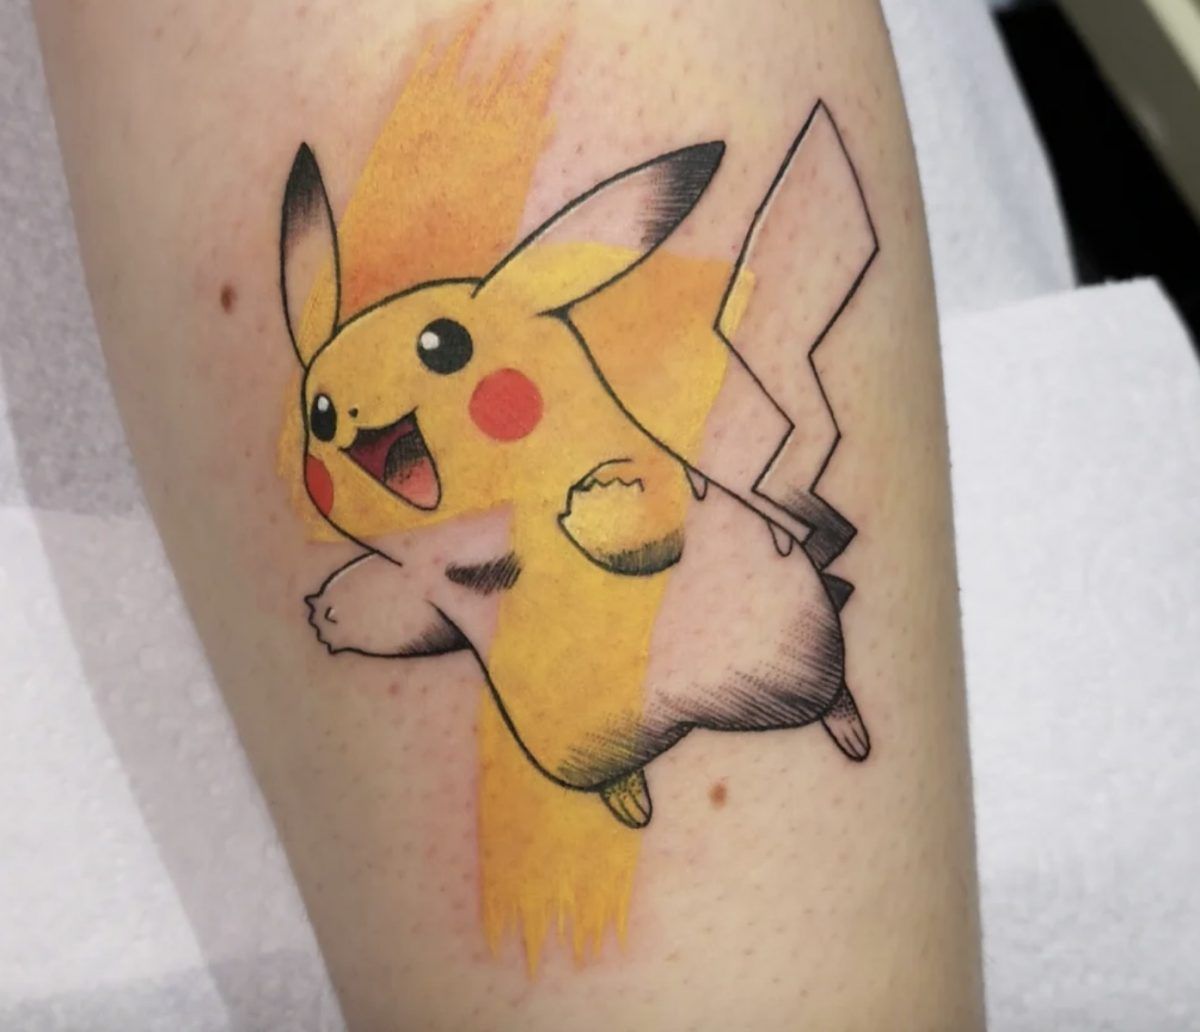 Tattoo of Pikachu with a mix of color and non-color